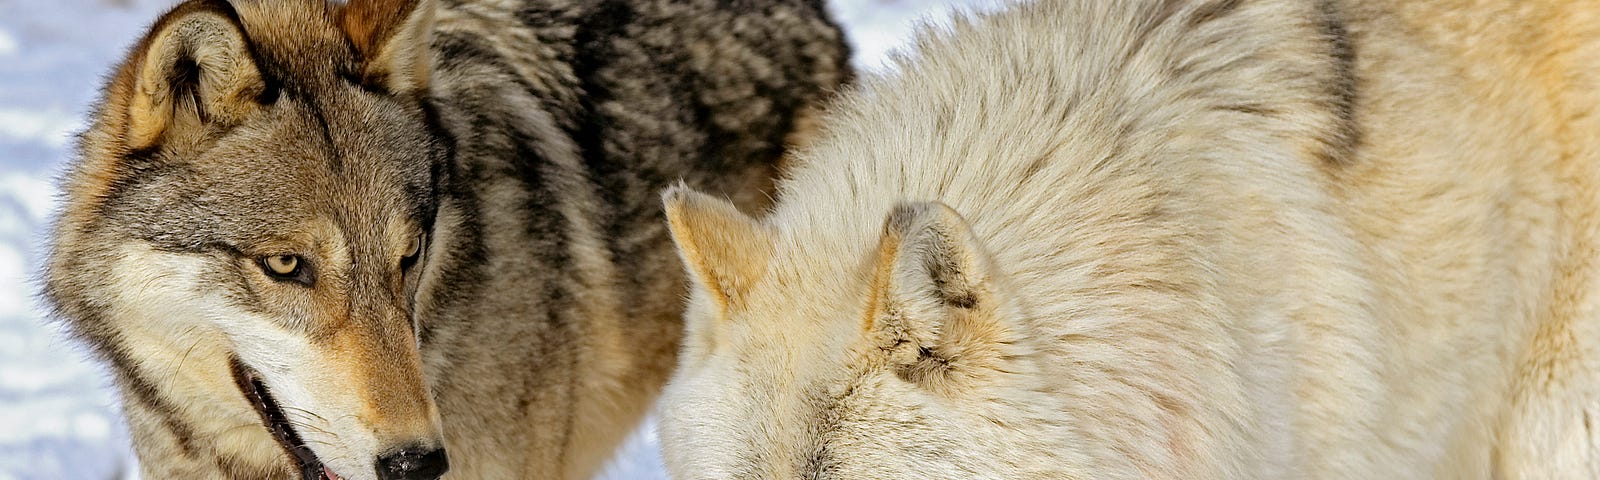 Two wolves in the snow. Depositphotos.